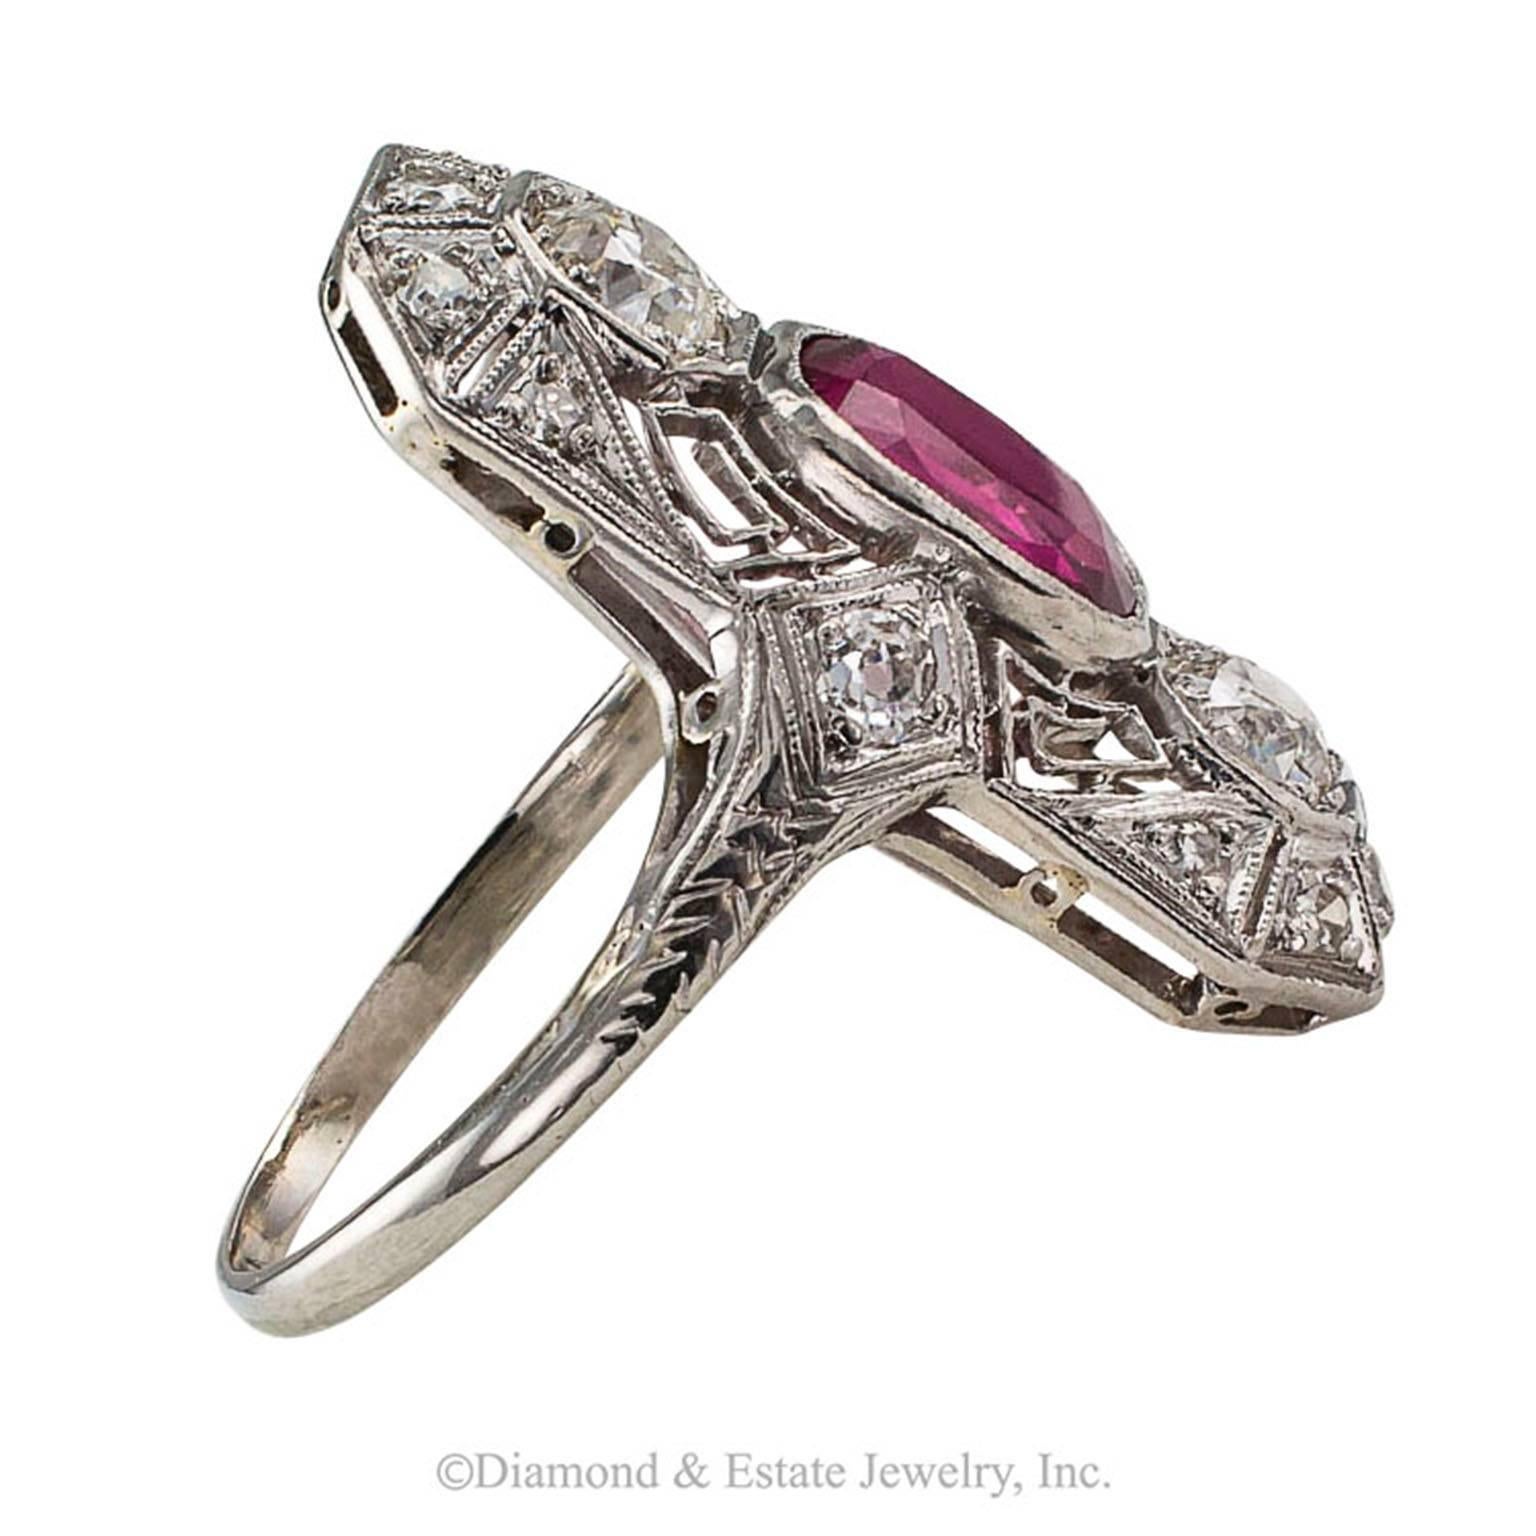 Art Deco Ruby Diamond Platinum Dinner Ring

Art Deco ruby and diamond platinum dinner ring circa 1925.  A single red cushion-shaped ruby weighing 1.56 carats flanked to the north and south by a pair of larger old European-cut diamonds on a